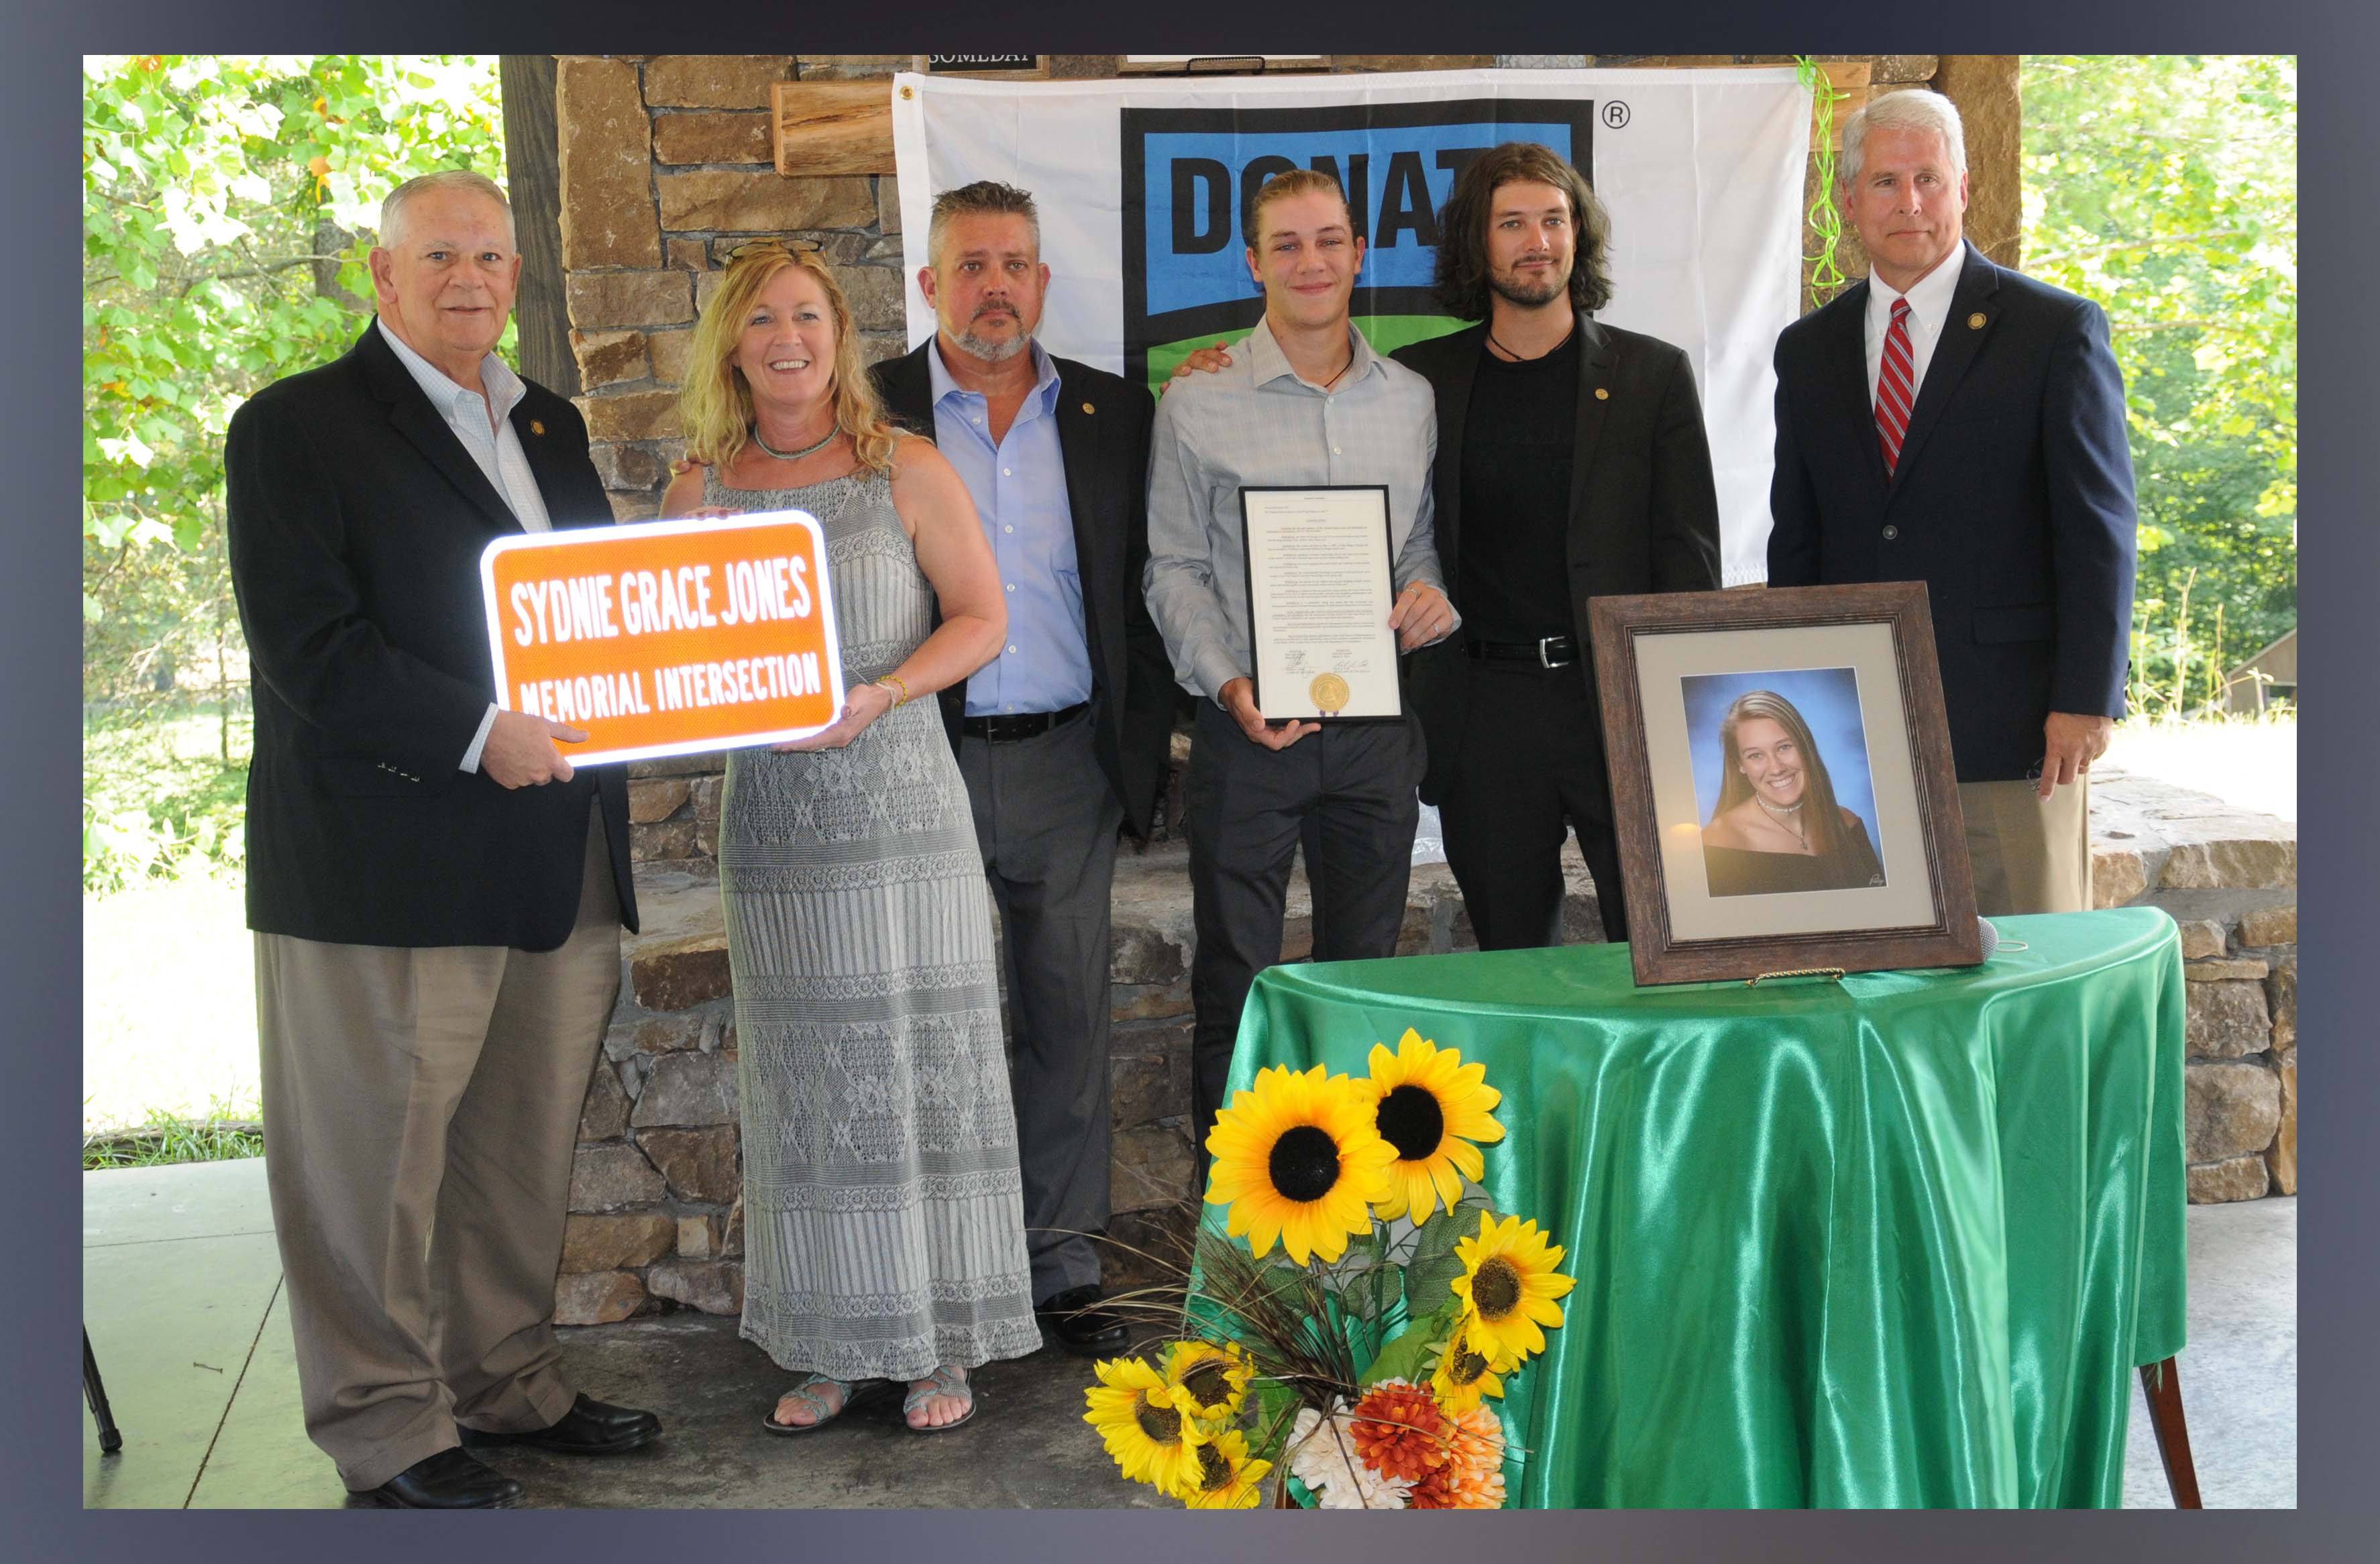 David Ralston, District 7 representative and Speaker of the Georgia House, presented replica signs to Sydnie Grace Jones’ family naming the intersection of Highways 515 and 325 in her honor. Shown, from left, are Ralston, Sydnie’s family, mother Melinda, father Anthony, brothers Andrew and Conner, and Representative Stan Gunter who co-sponsored the resolution naming the intersection.